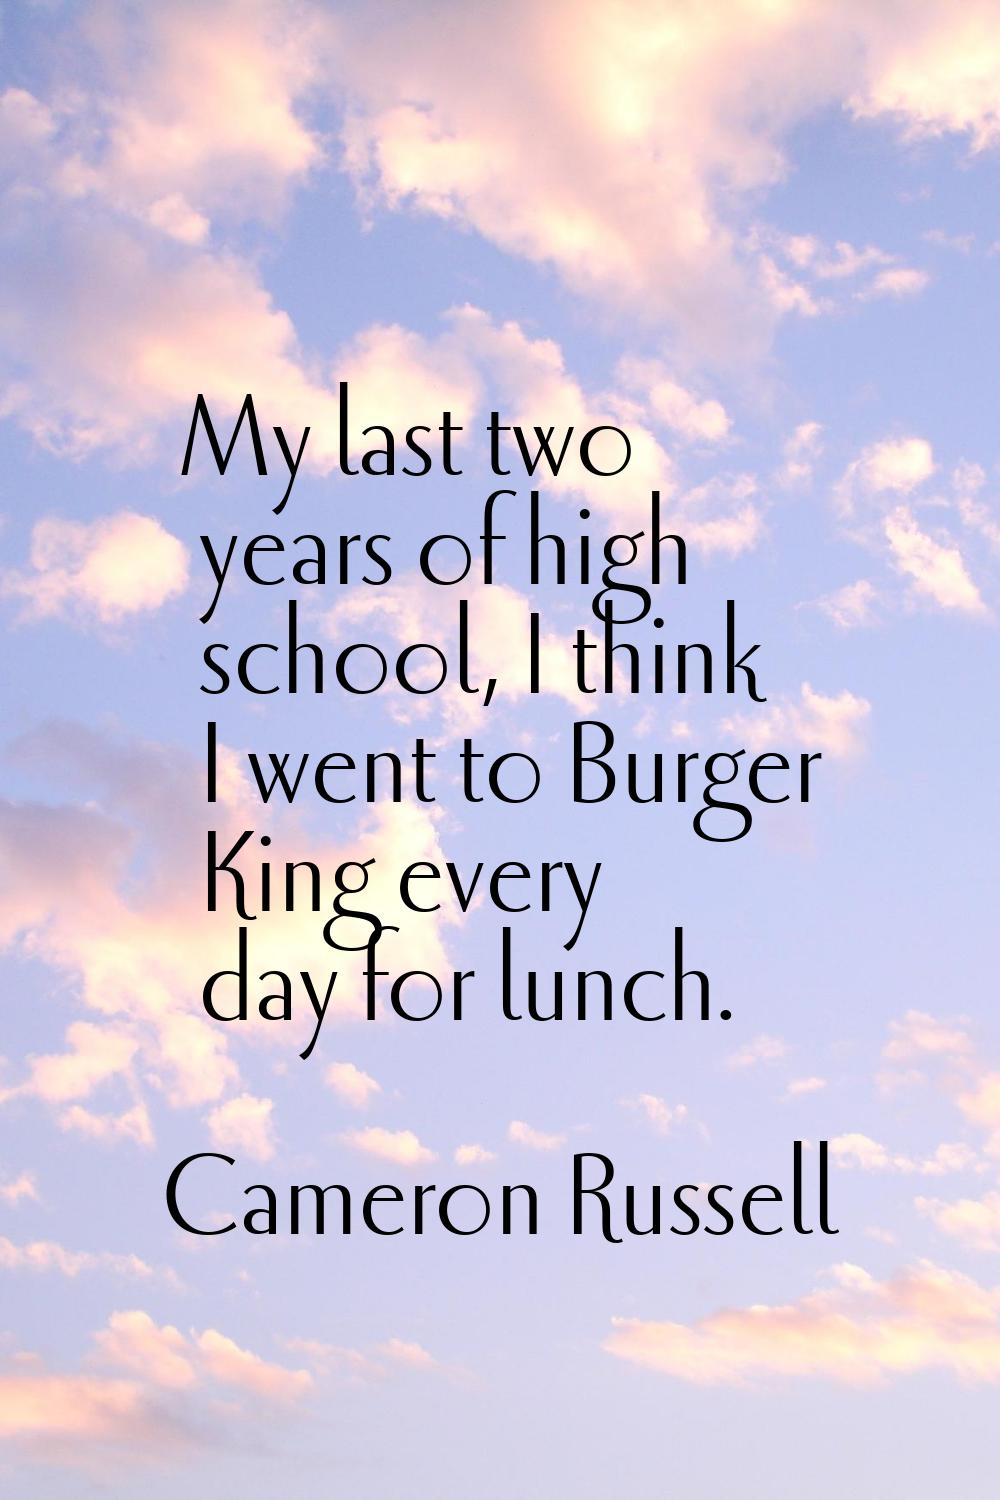 My last two years of high school, I think I went to Burger King every day for lunch.